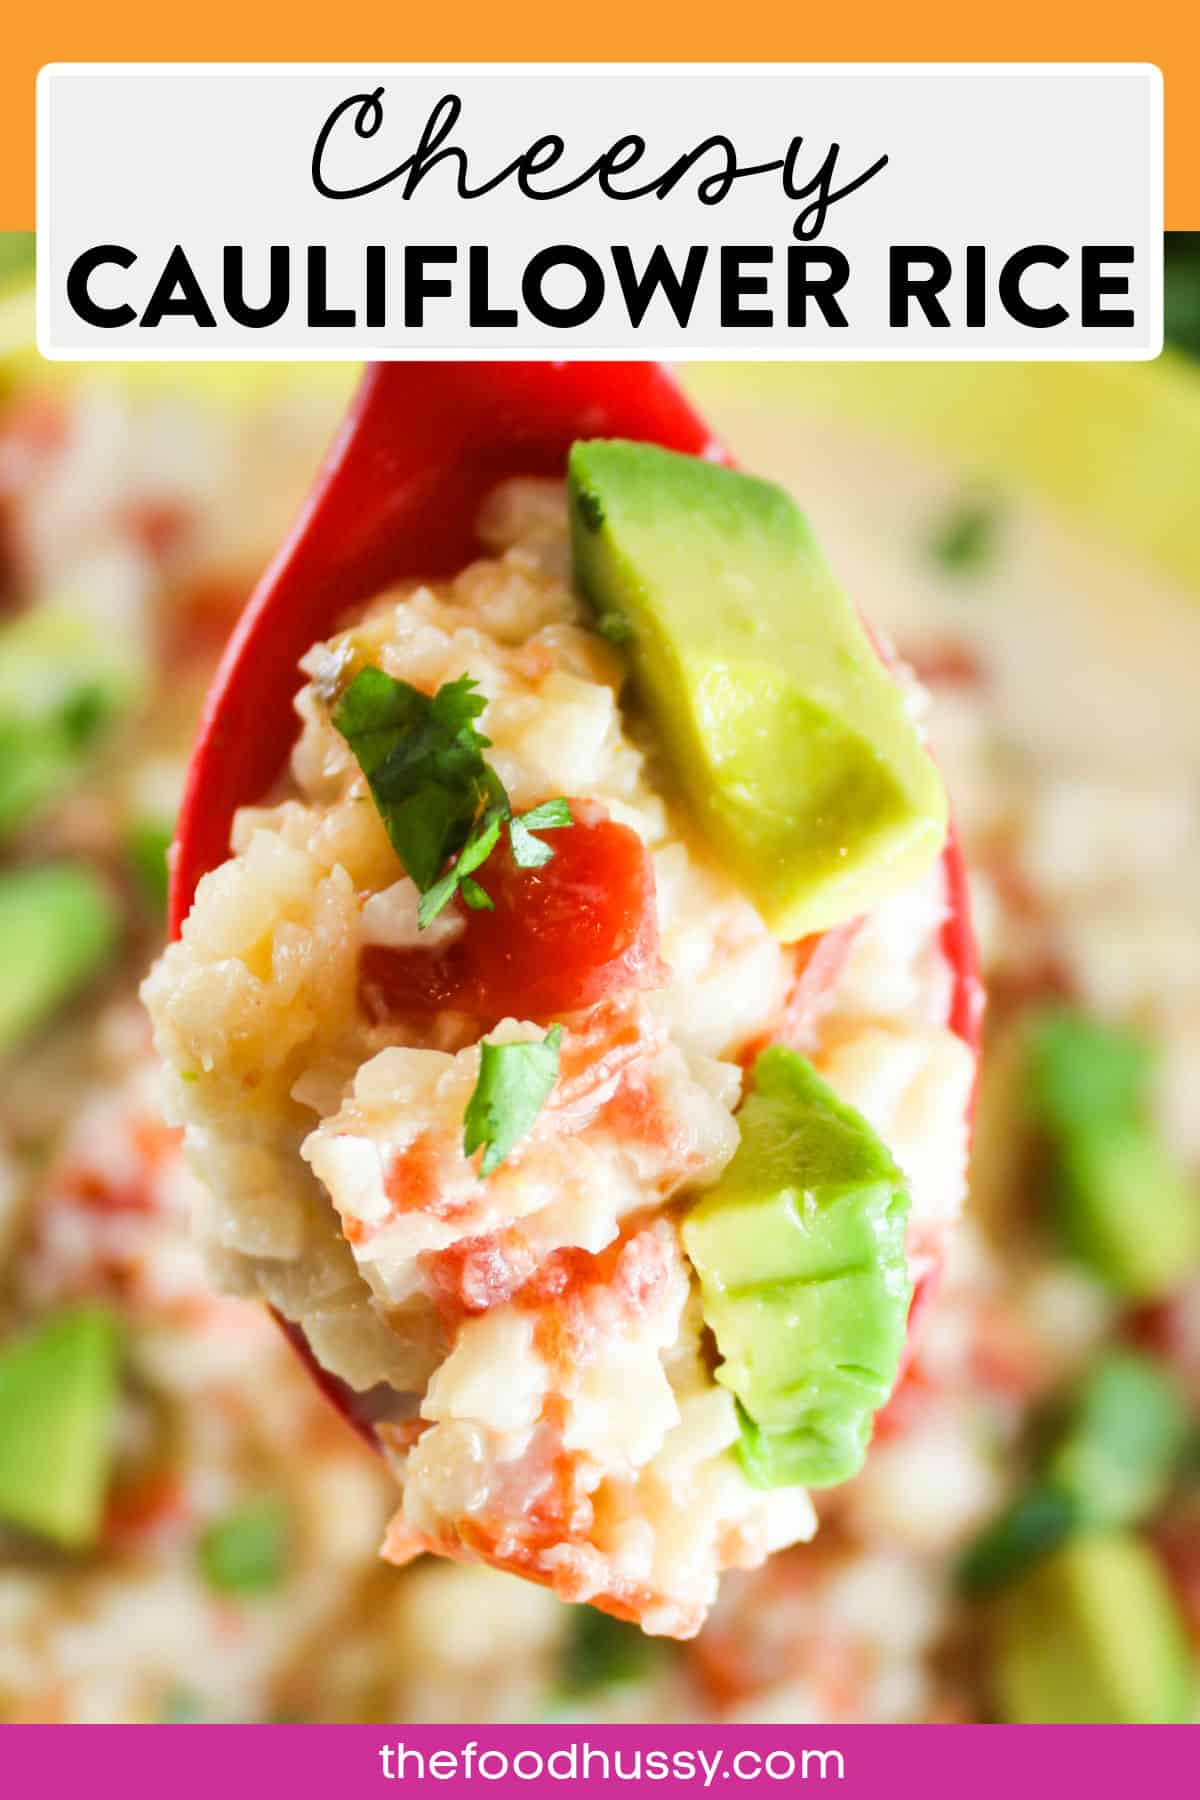 This Cheesy Cauliflower Rice is my absolute new favorite side dish! It's cheesy, creamy and full of veggies. I promise if you make this keto-friendly dish once - you'll be making it every week! via @foodhussy